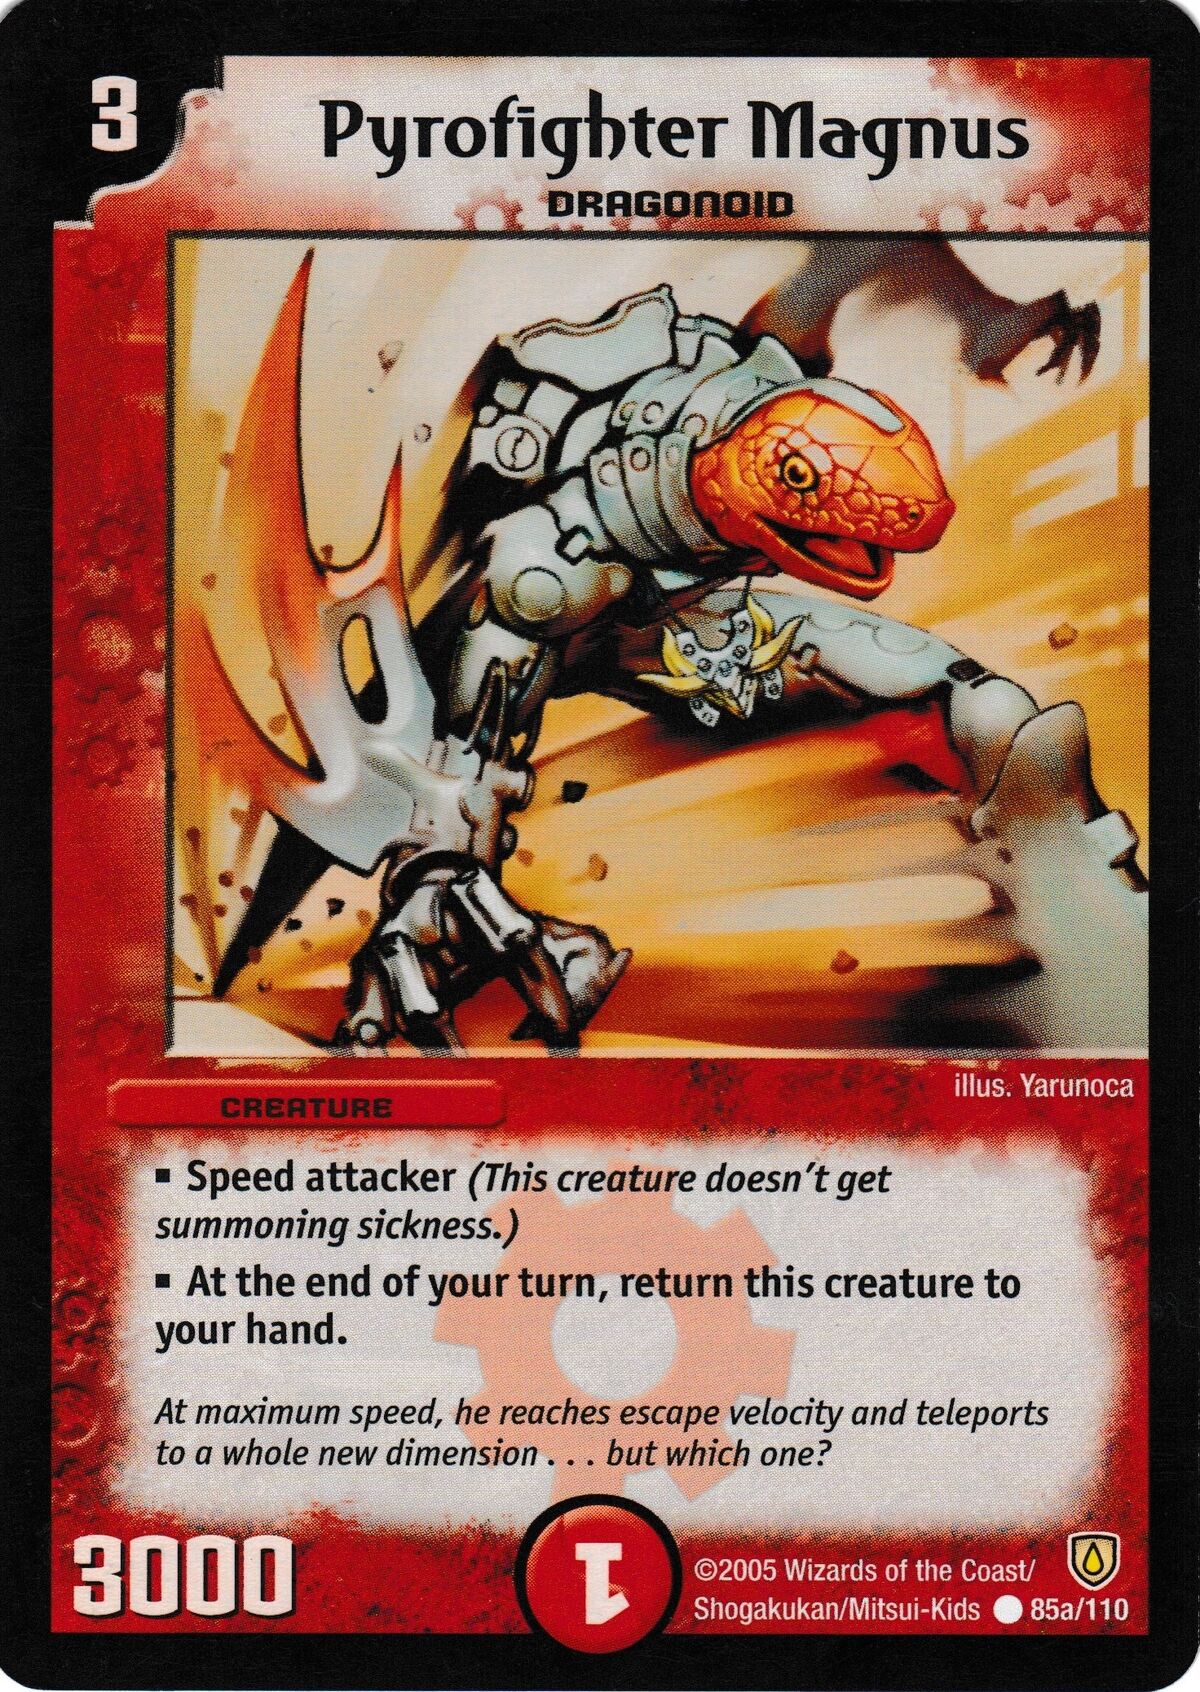 Duel Masters TCG Stomp-a-Trons of Invincible Wrath 2-Player